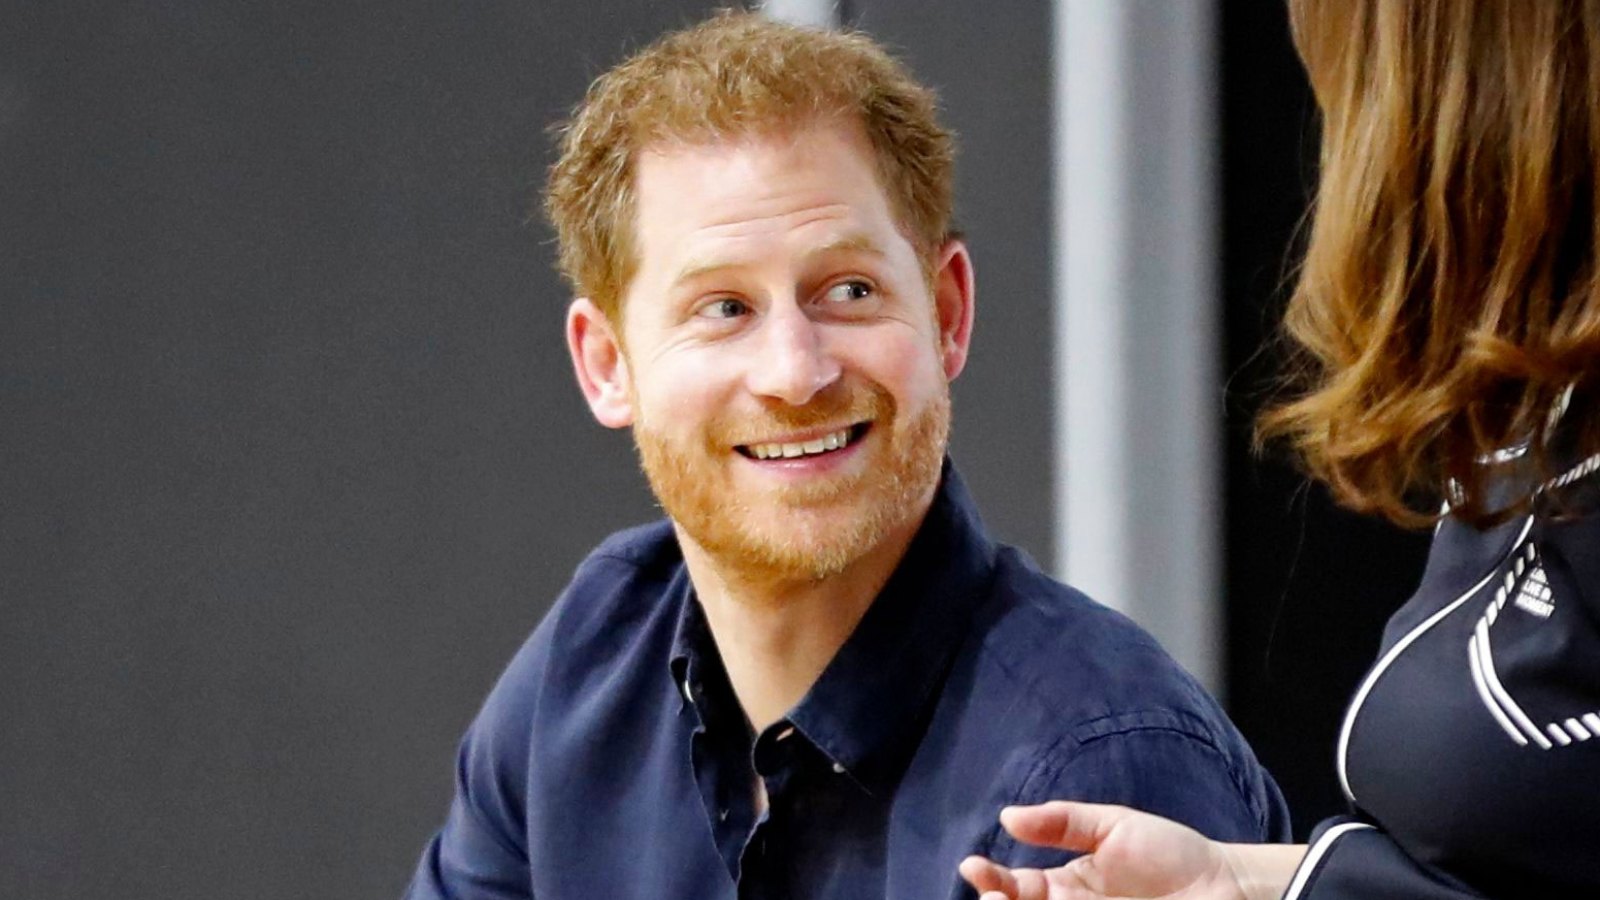 Prince Harry Has Adorable Response to Student Calling Him 'Handsome' in Japan